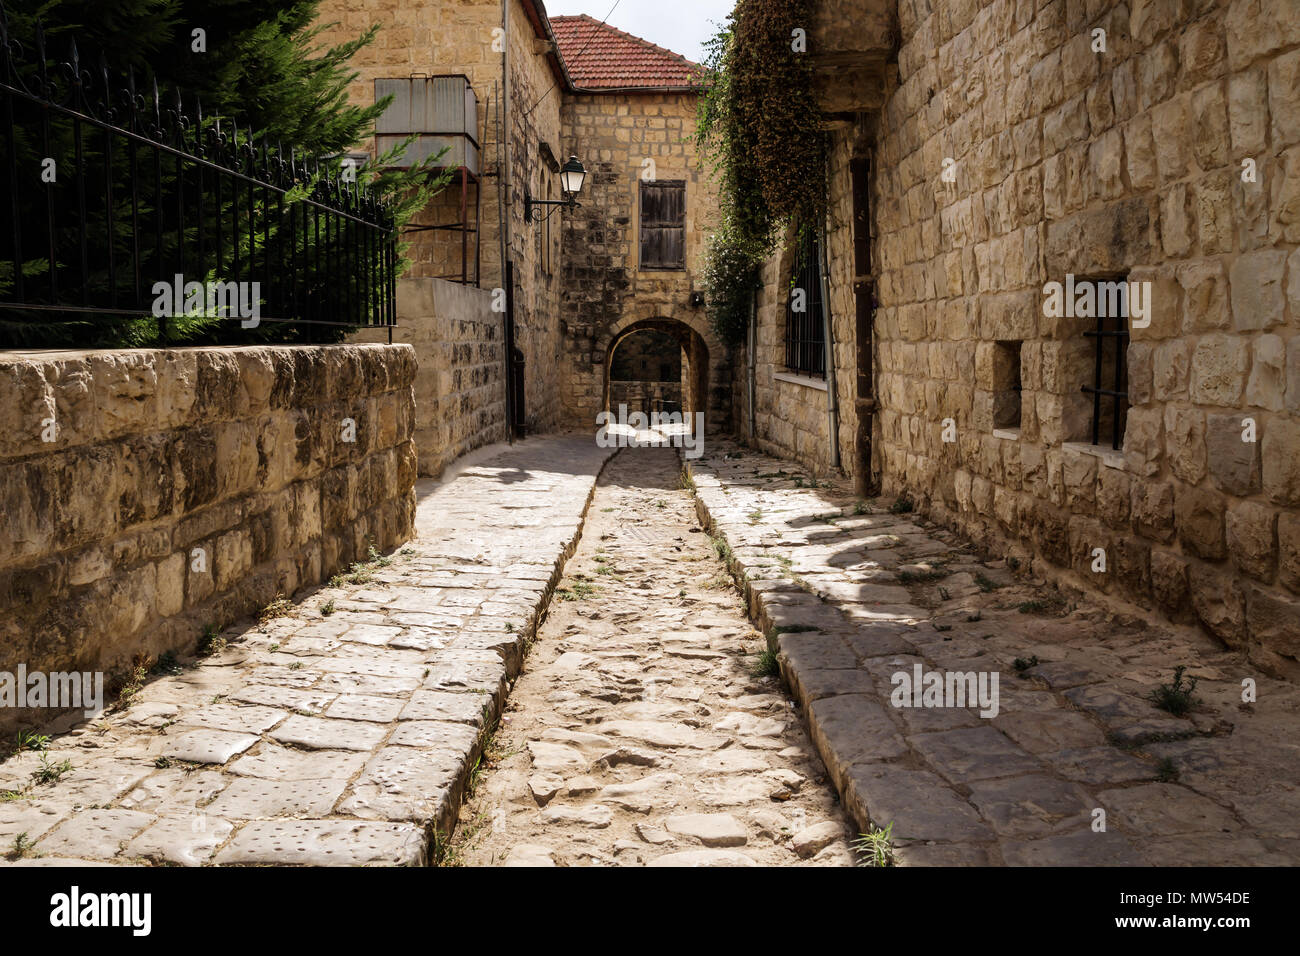 Ancient streets with arch through house in traditional town Deir el Qamar, Lebanon Stock Photo